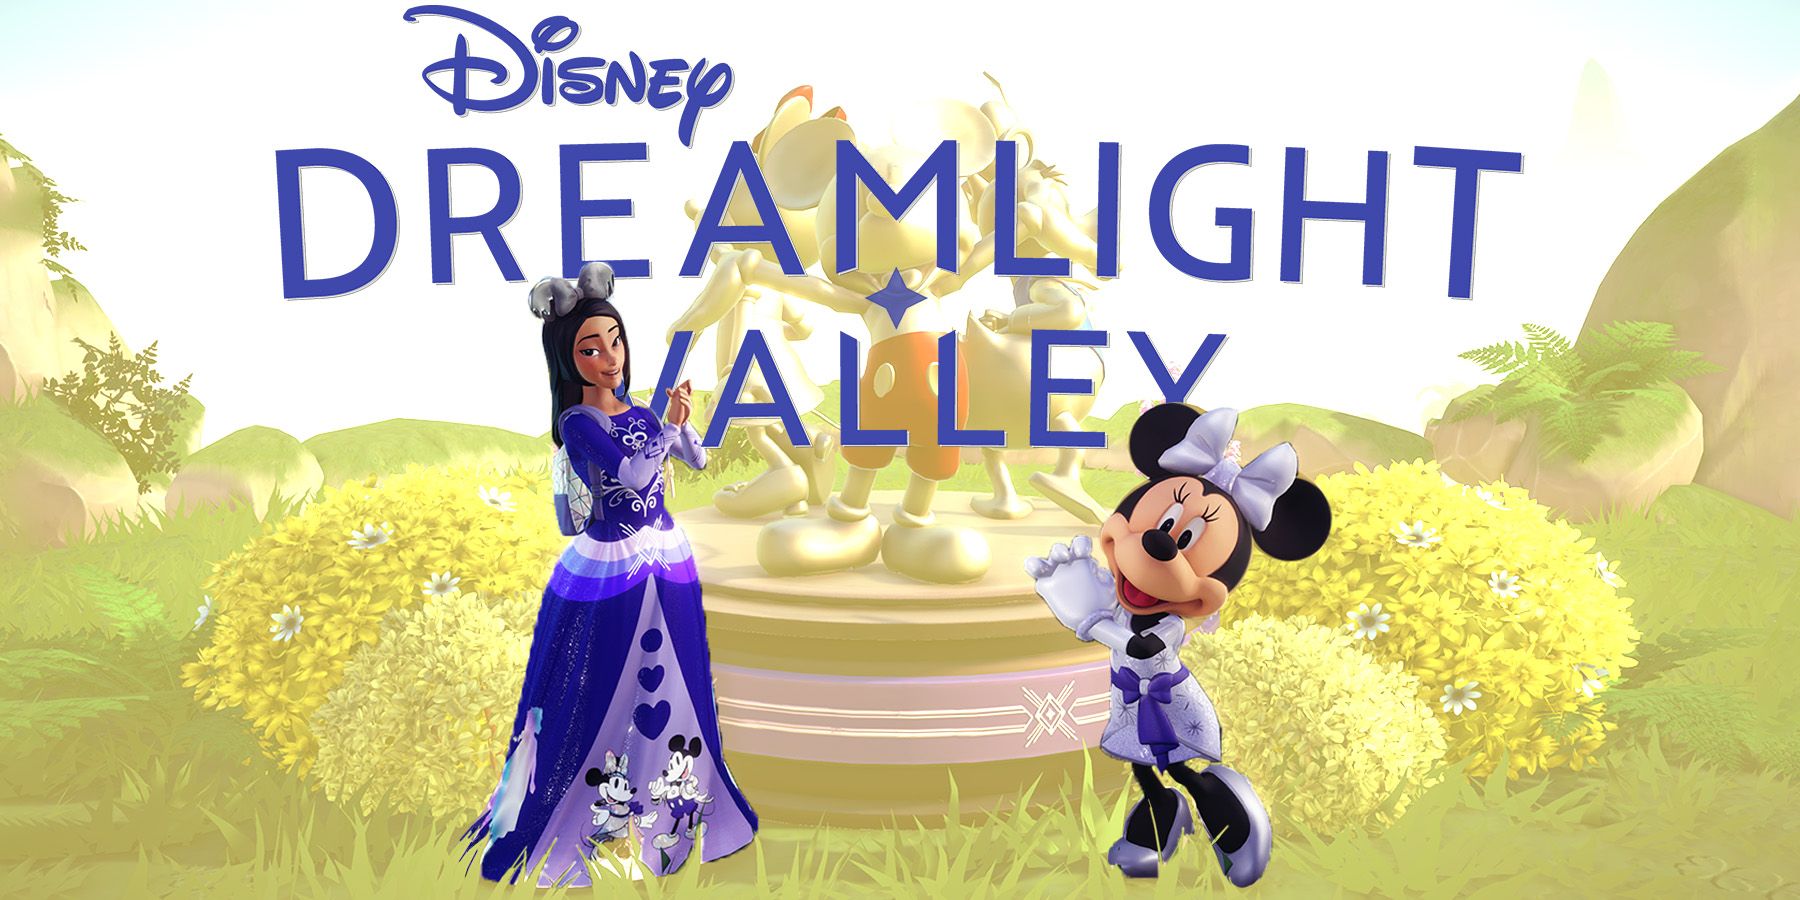 Disney Dreamlight Valley Minnie Mouse and player character in purple dresses background swap